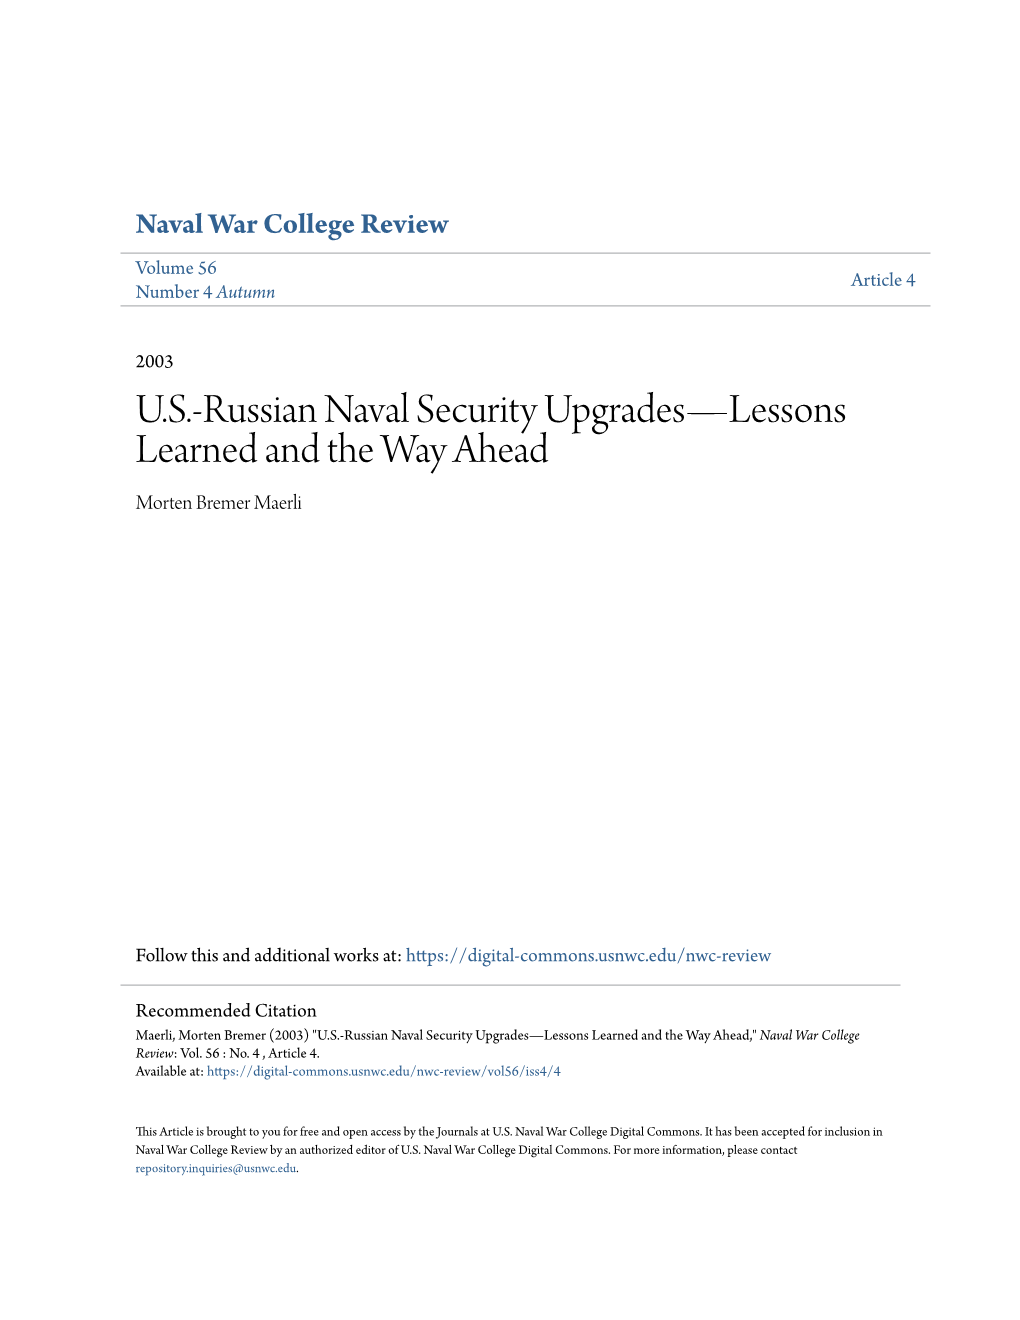 U.S.-Russian Naval Security Upgrades—Lessons Learned and the Way Ahead Morten Bremer Maerli